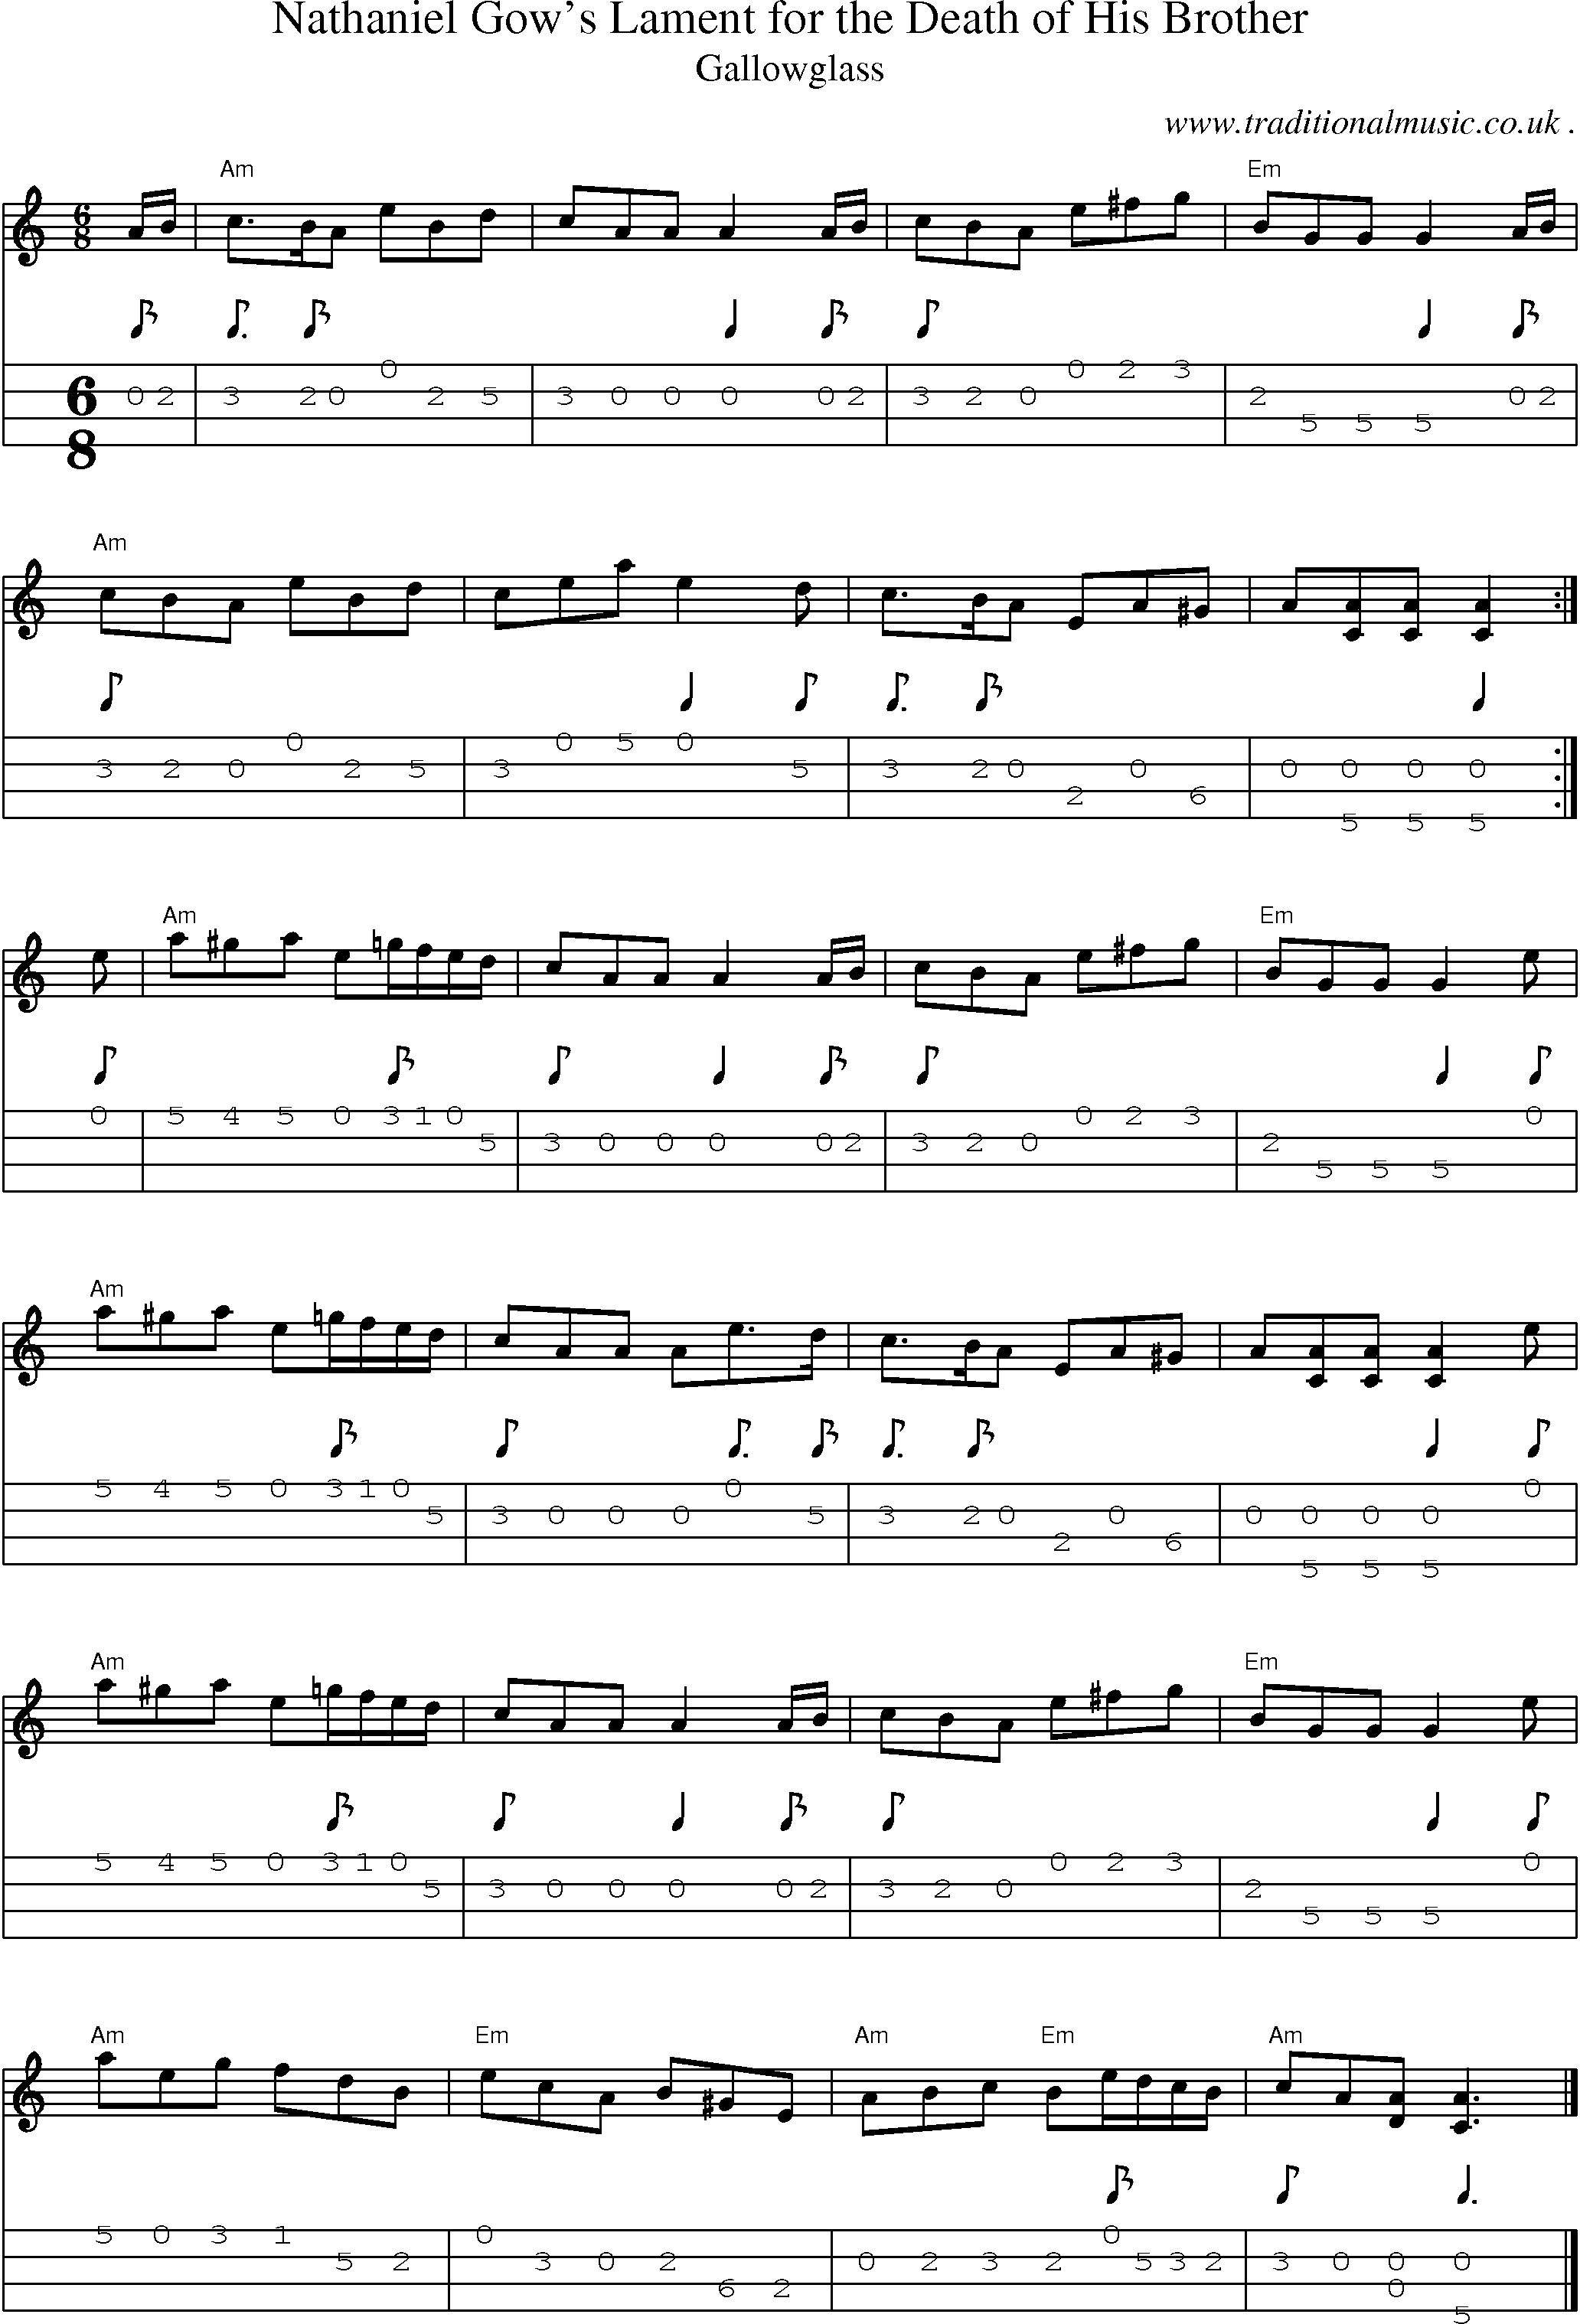 Music Score and Guitar Tabs for Nathaniel Gows Lament for the Death of His Brother